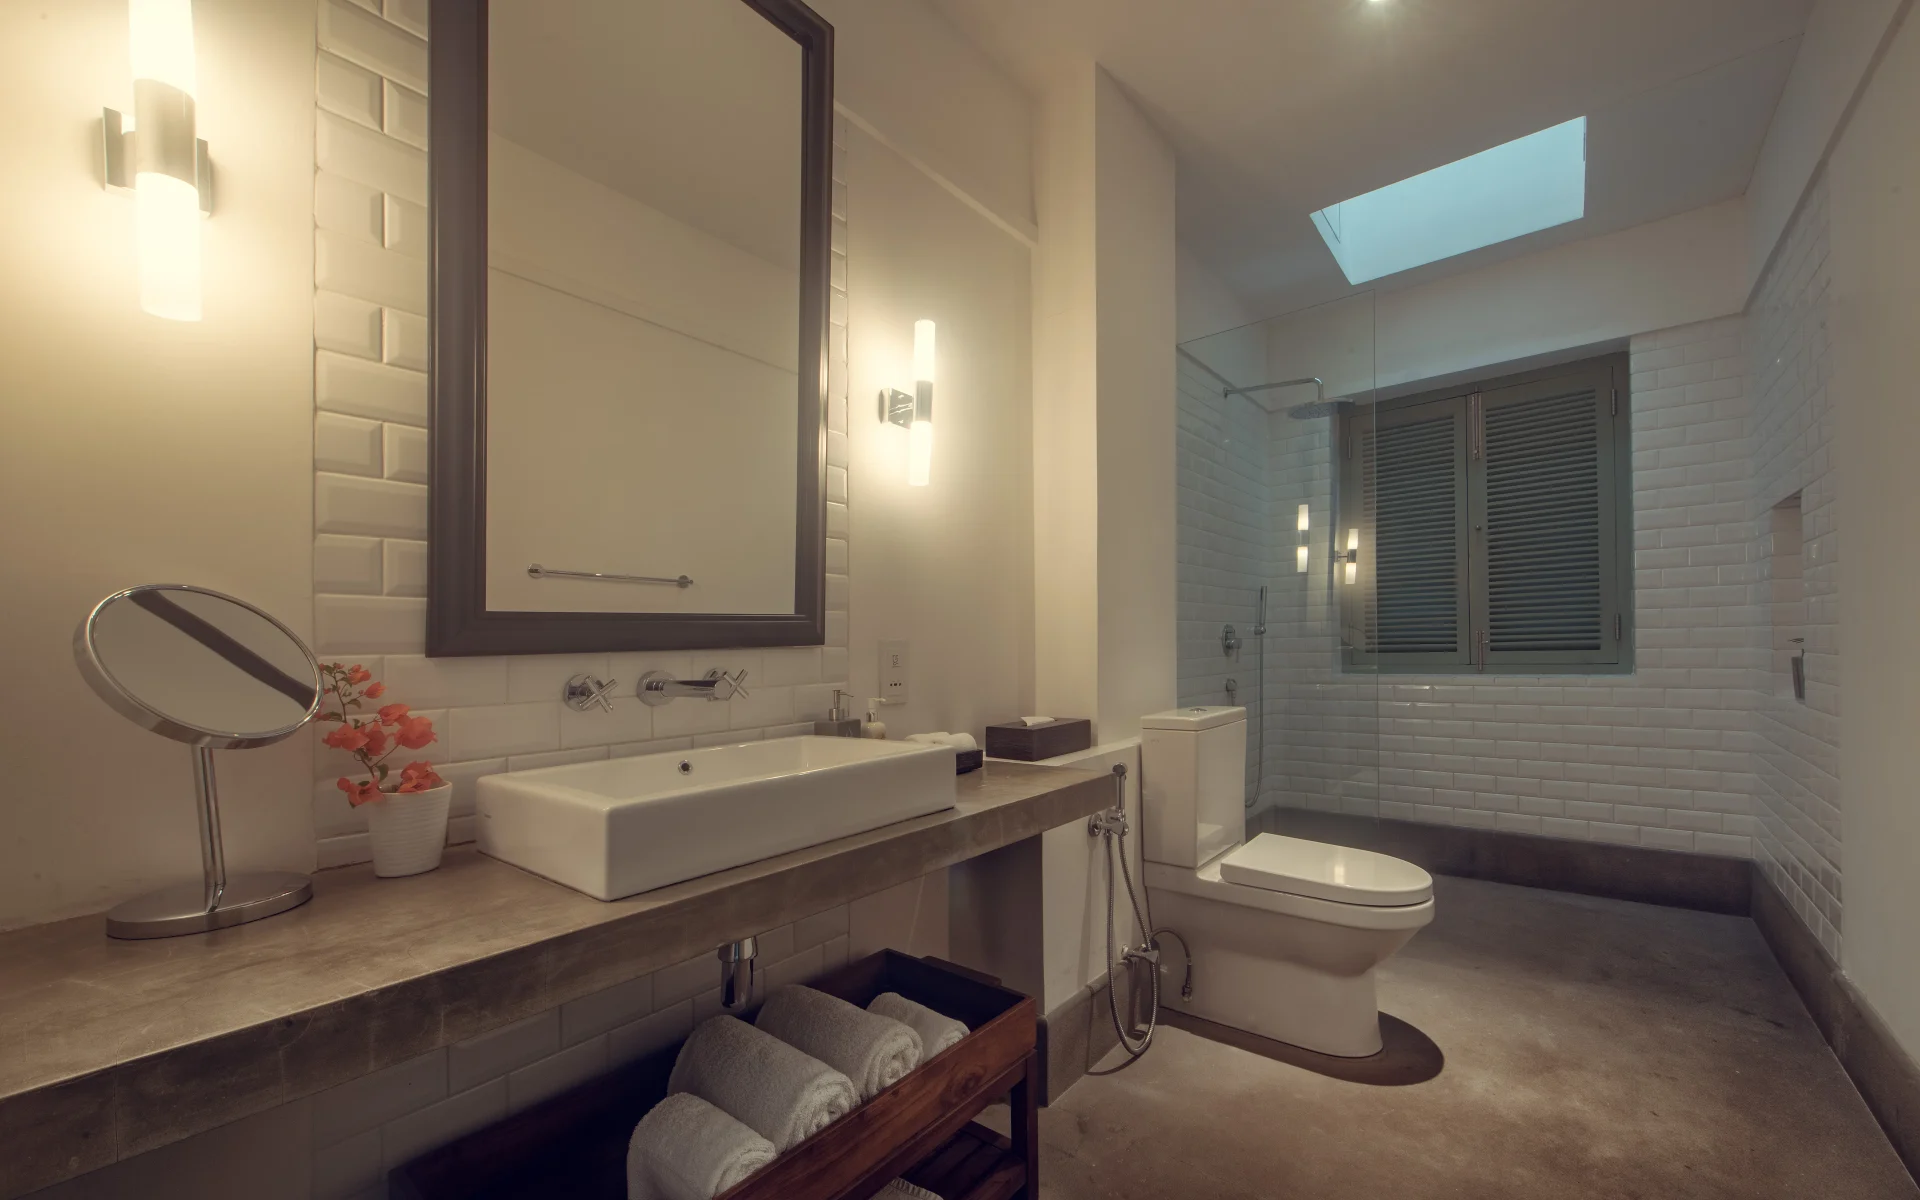 One of the private bathrooms at Fort Bazaar has sleek, modern decor and a large, walk-in shower.